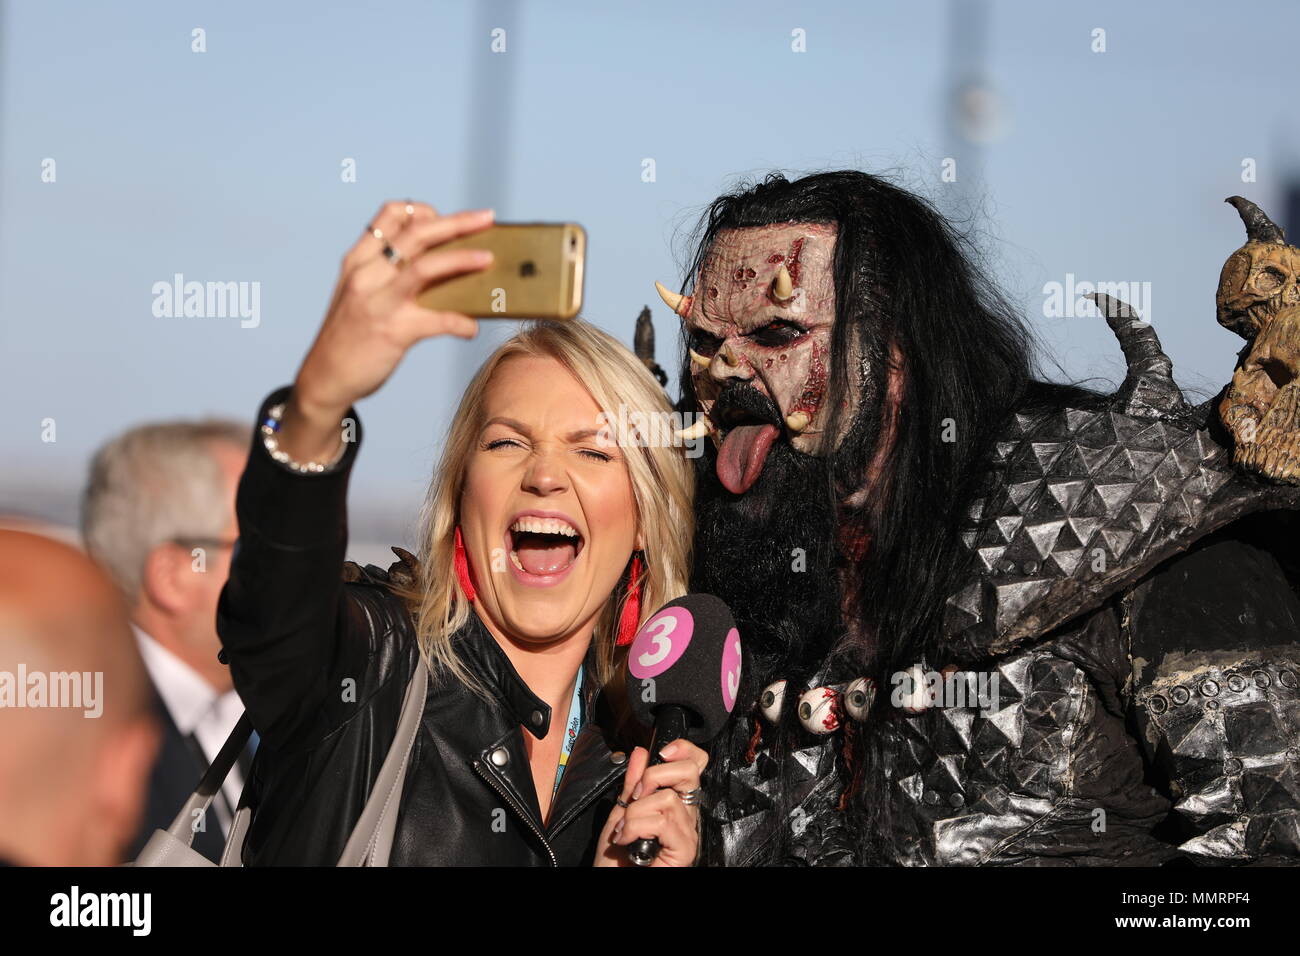 Portugal, Lisbon. 12th May 2018. A television presenter takes a selfie with Mr. Lordi (Tomi Petteri Putaansuu), singer of Finnish band Lordi, shortly before the finals of the 63rd Eurovision Song Contest. Photo: Jörg Carstensen/dpa Credit: dpa picture alliance/Alamy Live News Stock Photo